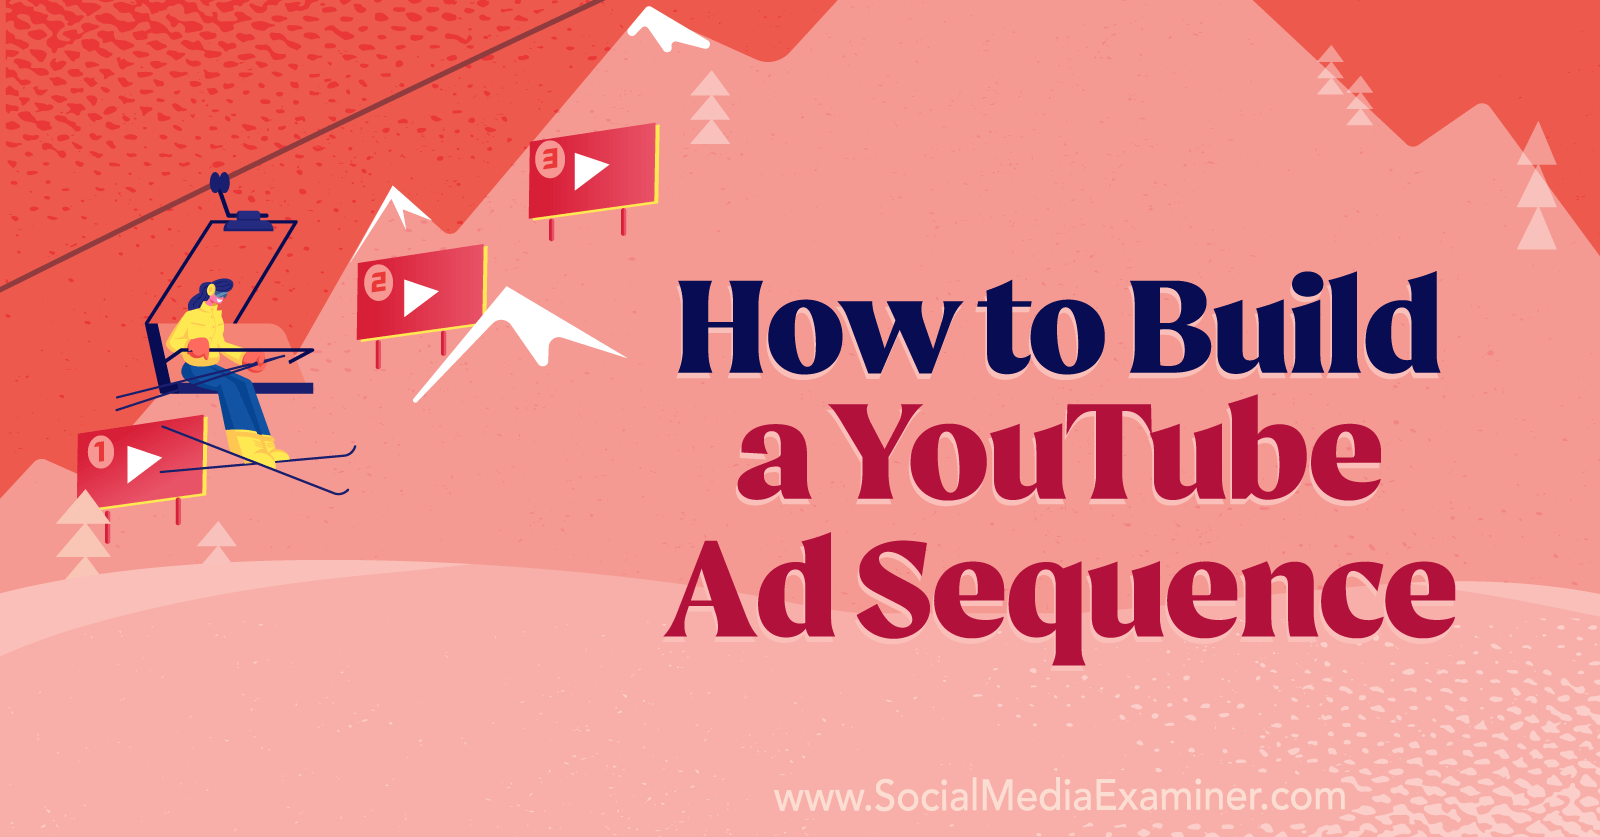 How to Build a YouTube Ad Sequence by Anna Sonnenberg on Social Media Examiner.